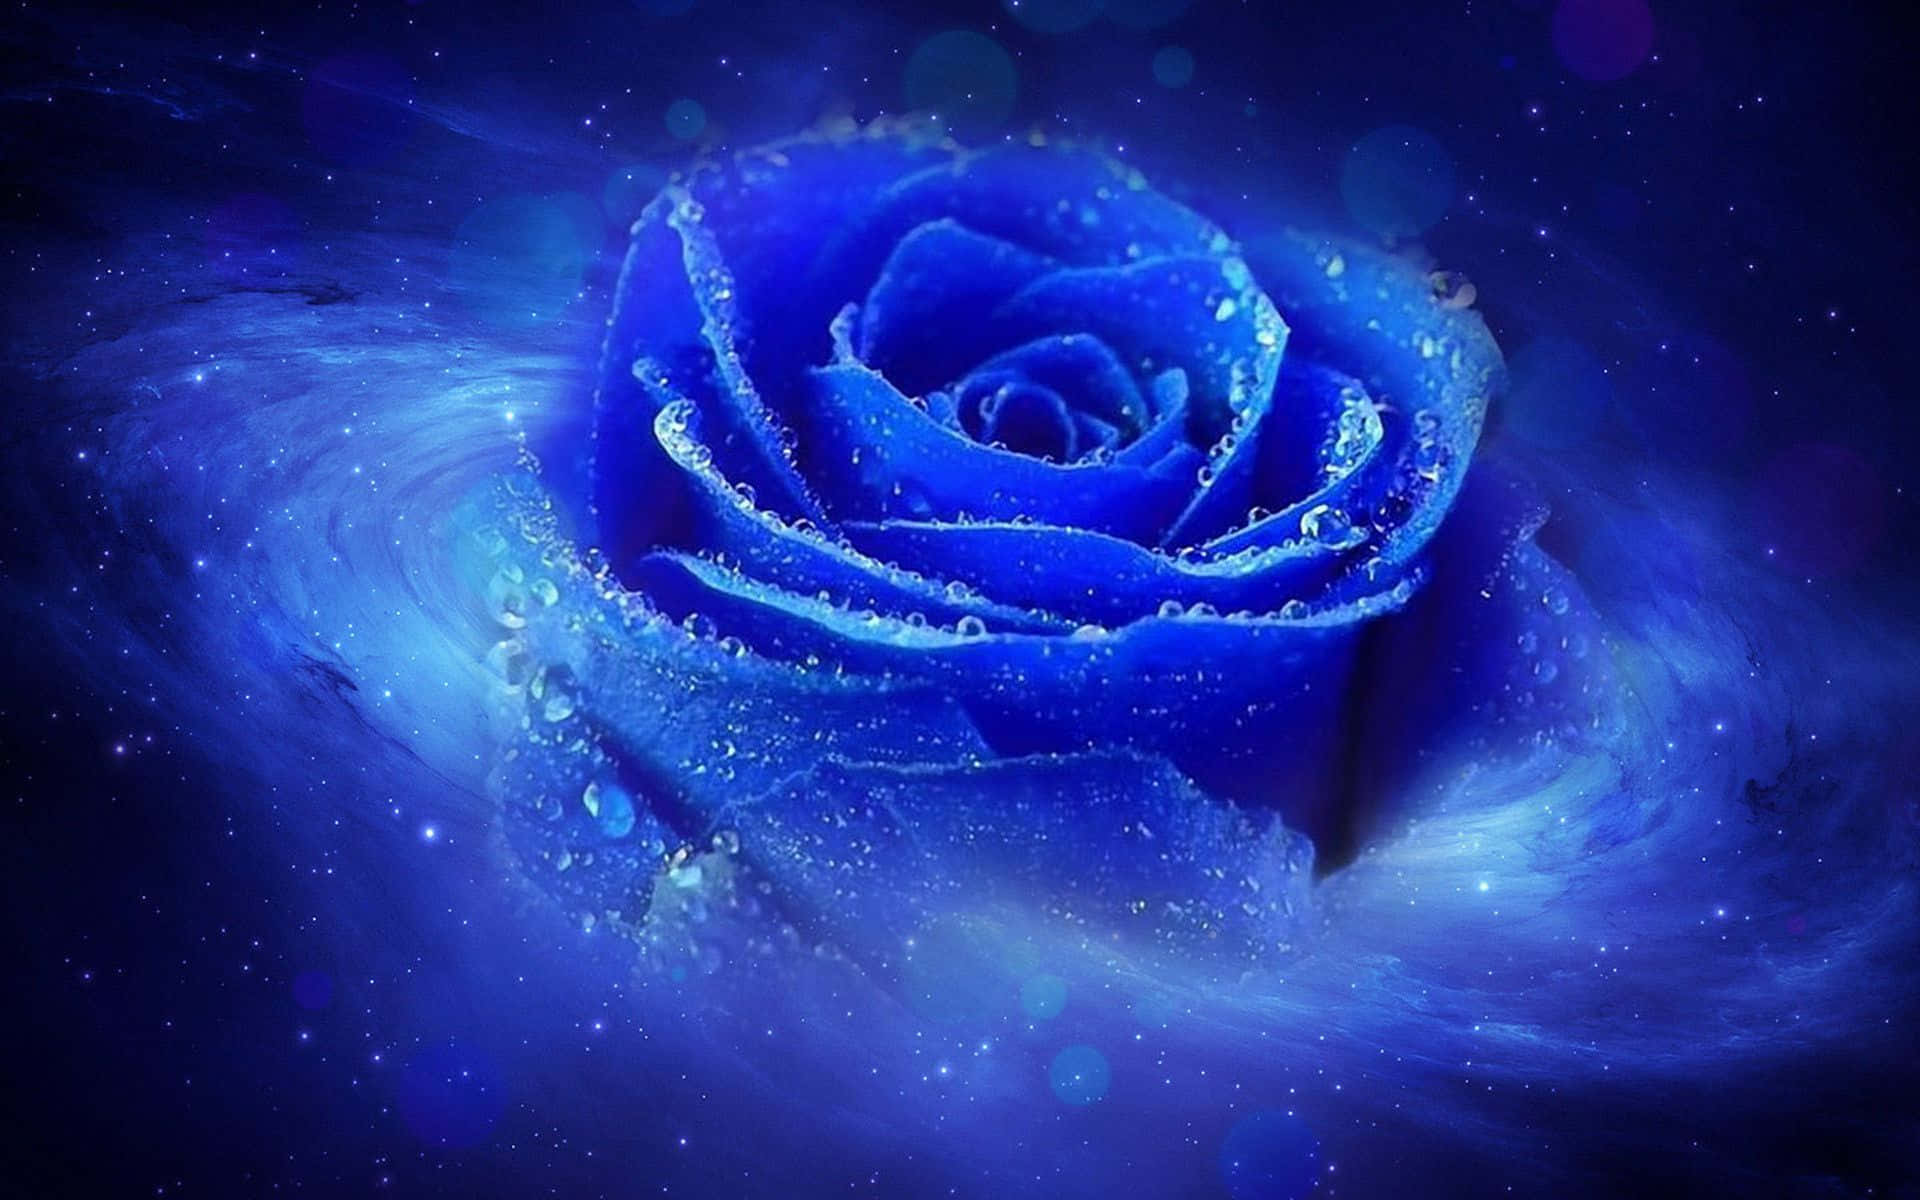 An Ethereal Blue Rose Wallpaper